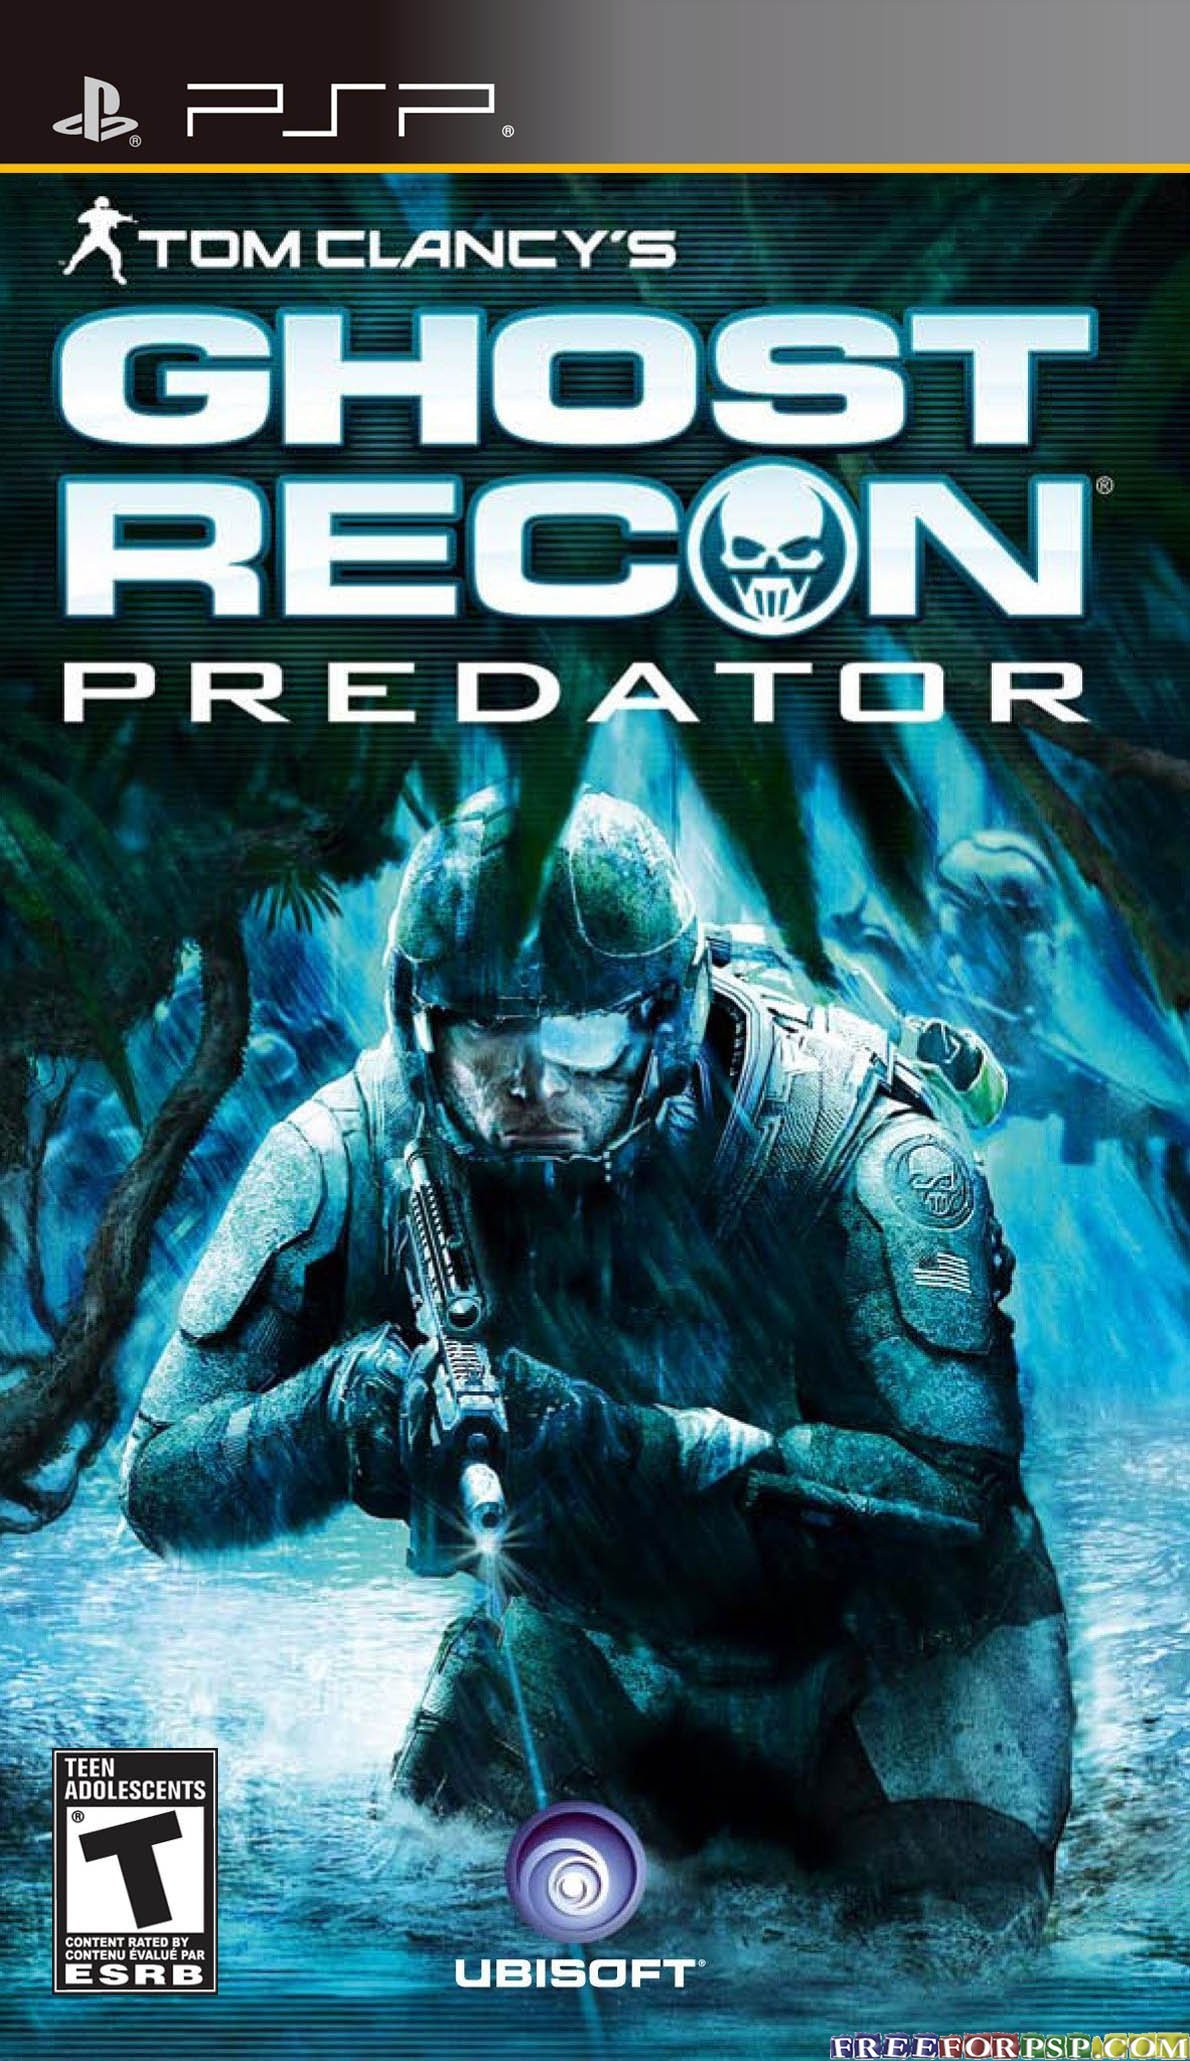 Image of Tom Clancy's Ghost Recon Predator